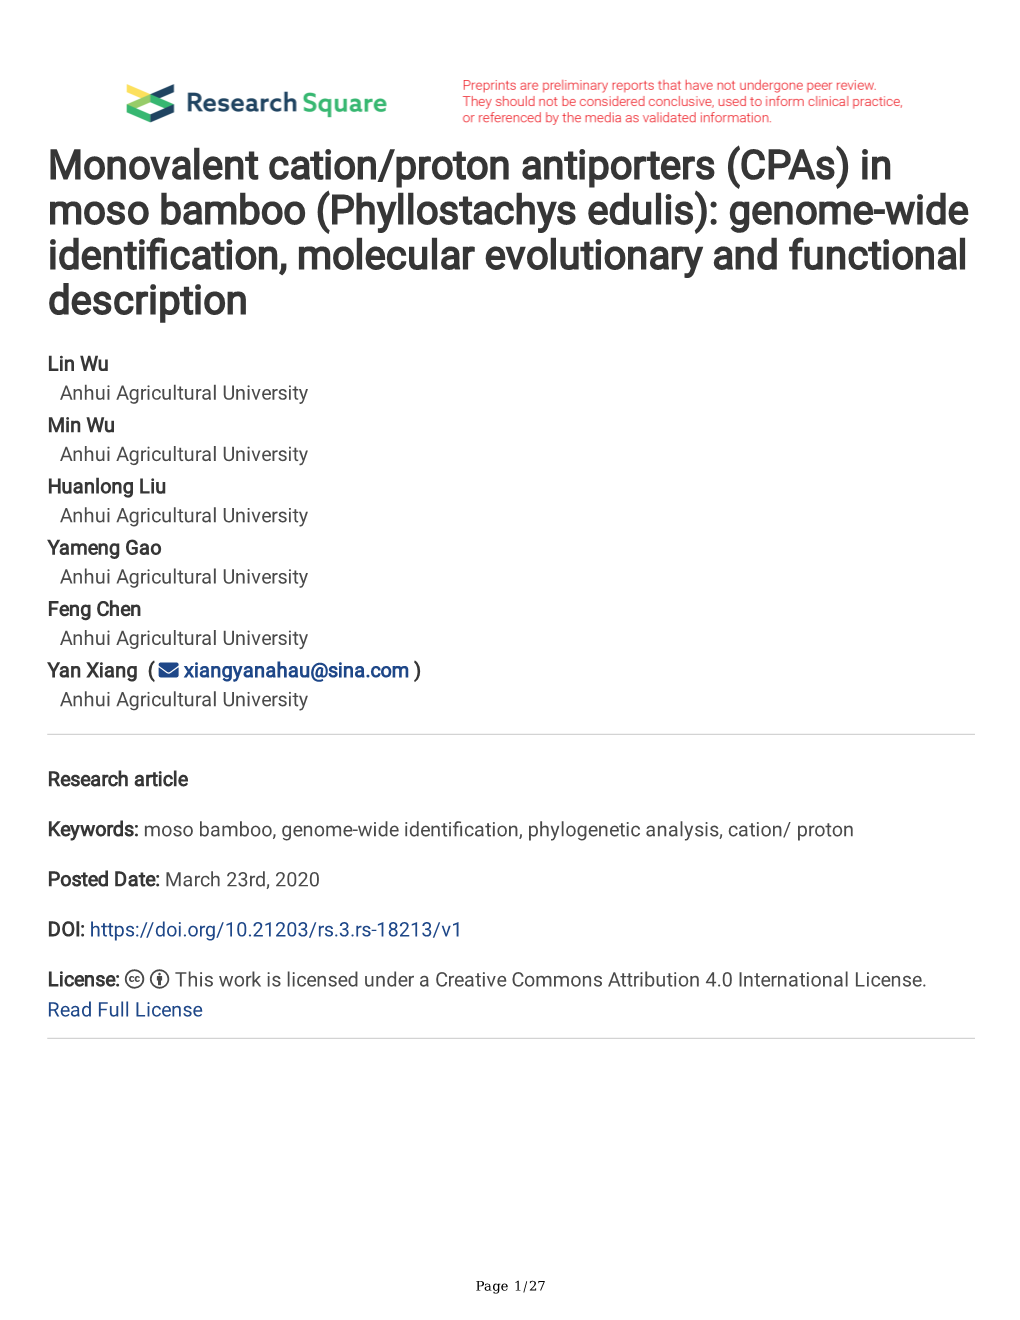 In Moso Bamboo (Phyllostachys Edulis): Genome-Wide Identifcation, Molecular Evolutionary and Functional Description